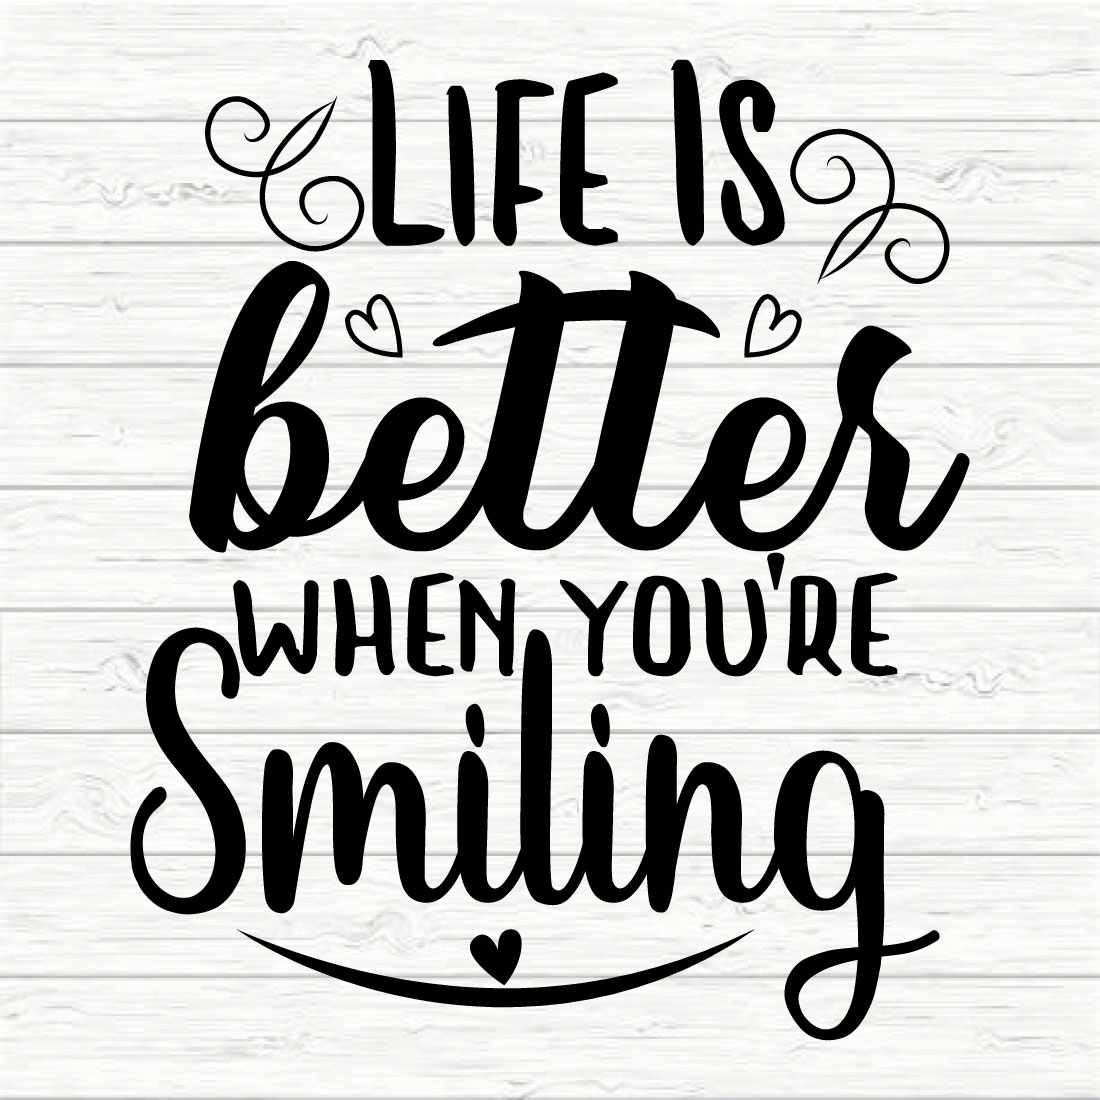 Life Is Better When You re Smiling cover image.